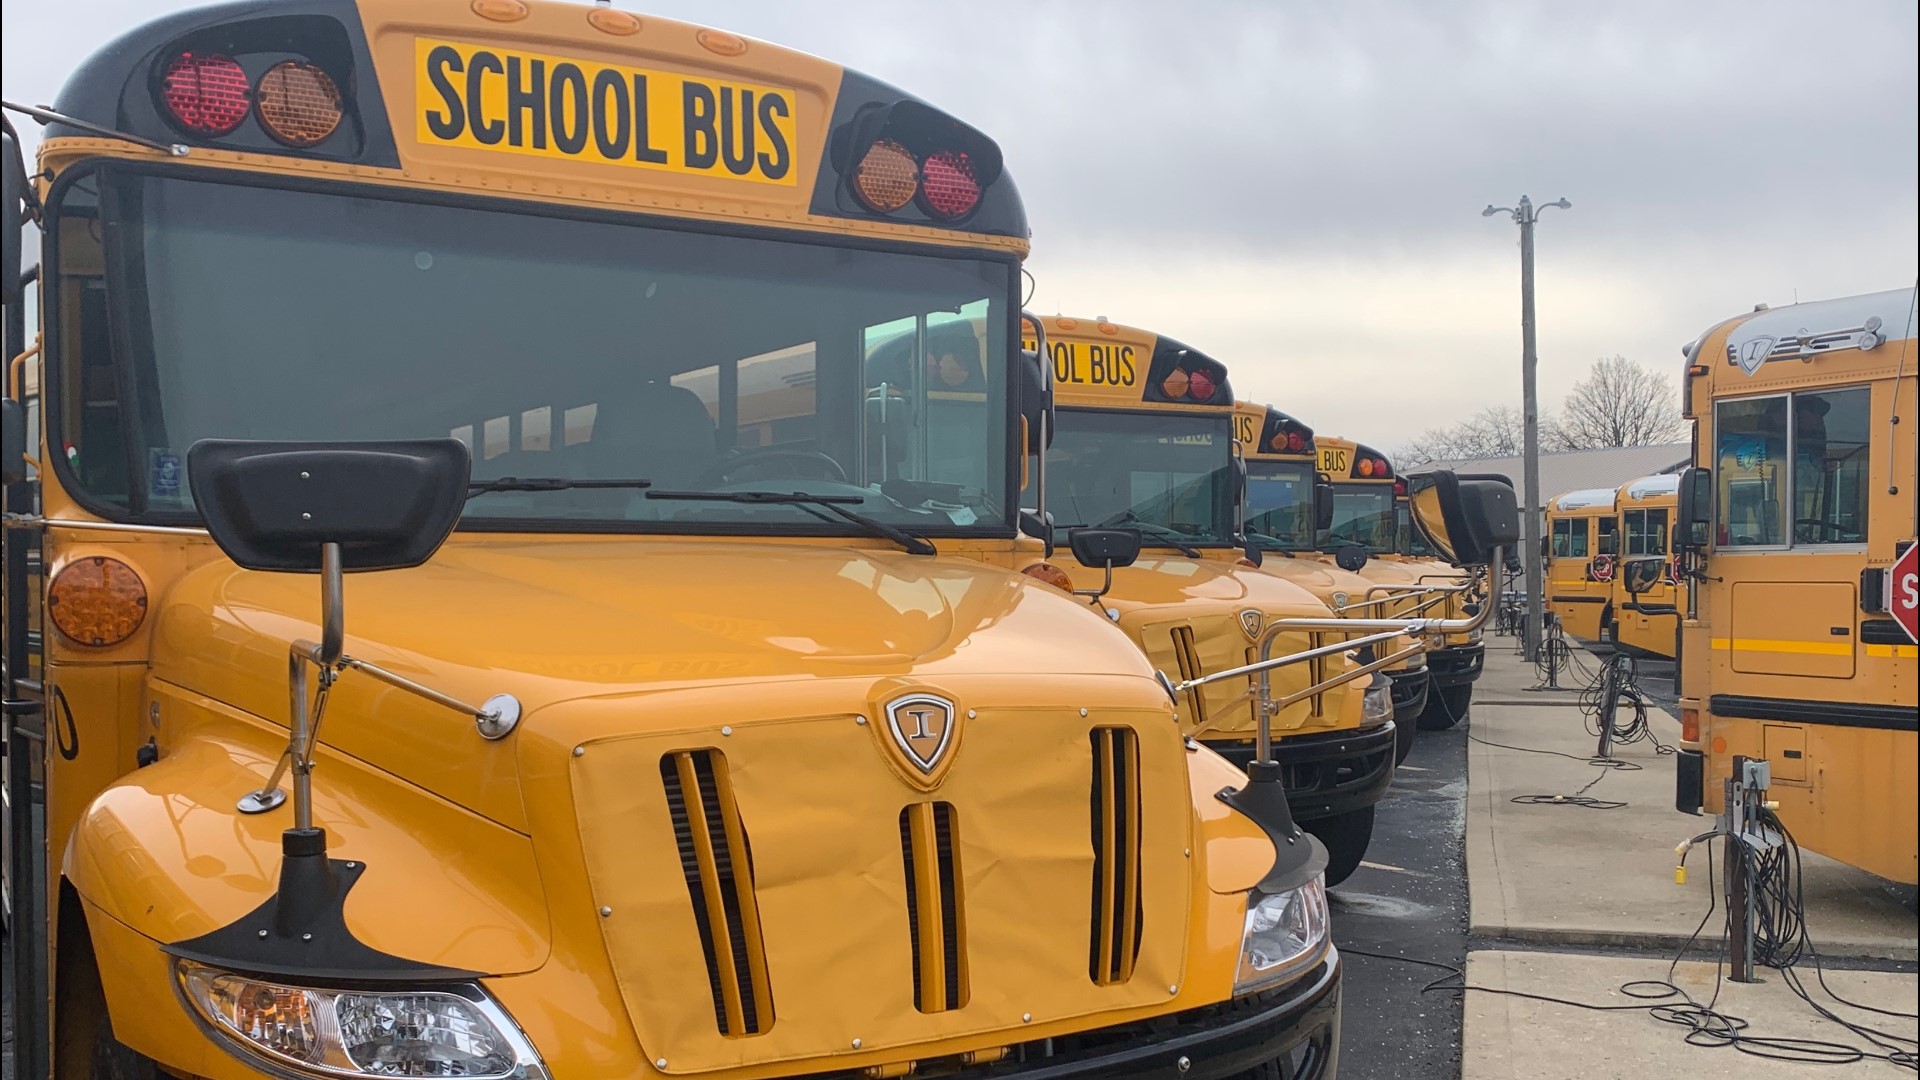 Help is on the way for parents left scrambling after last-minute bus route cancellations. It's a nationwide problem that federal and local leaders are trying to fix.